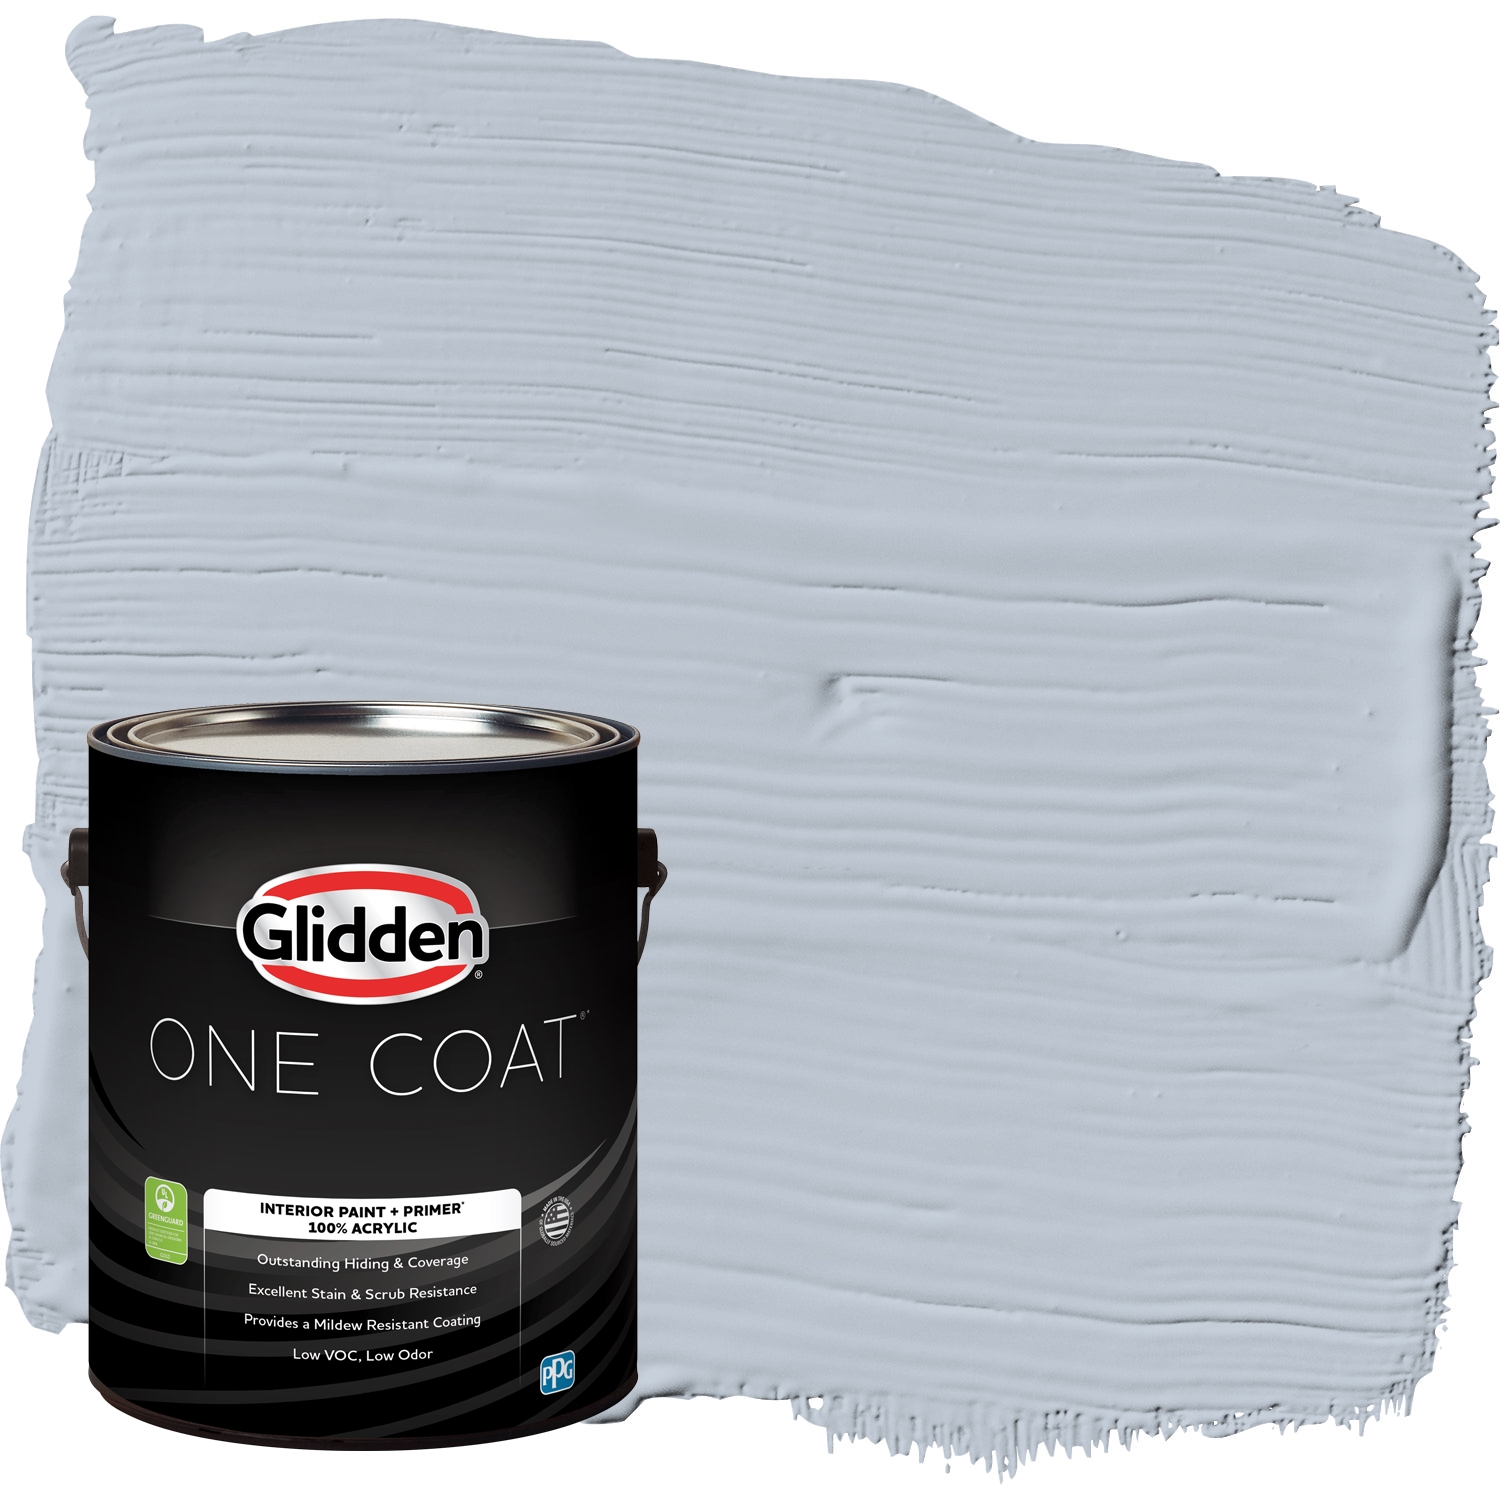 Glidden One Coat Interior Paint and Primer, Blue Dolphin / Blue, Gallon, Eggshell - image 1 of 11